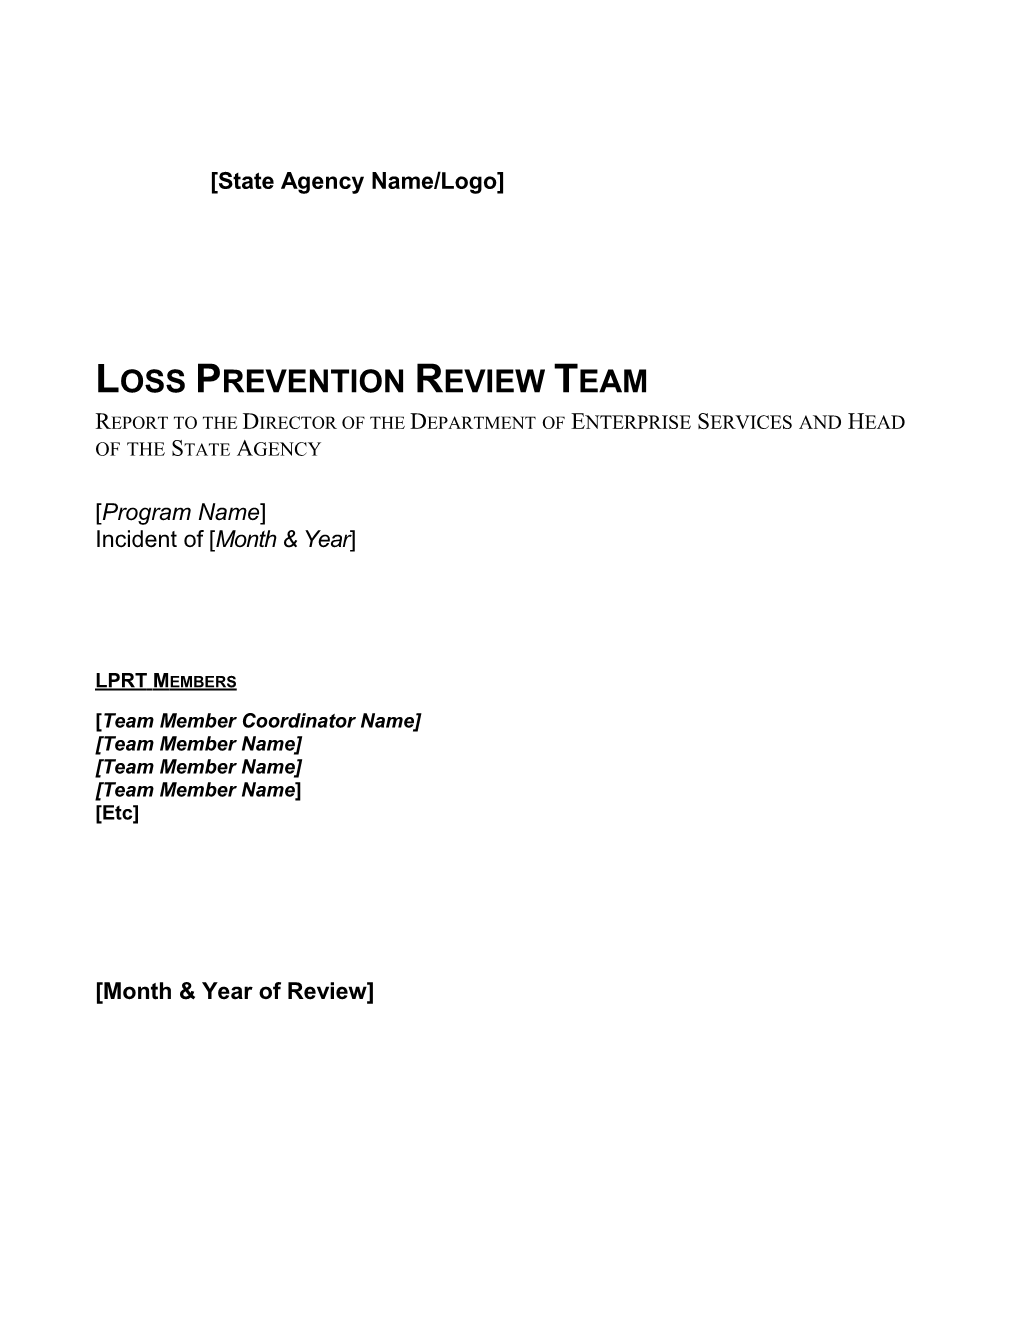 Loss Prevention Review Team